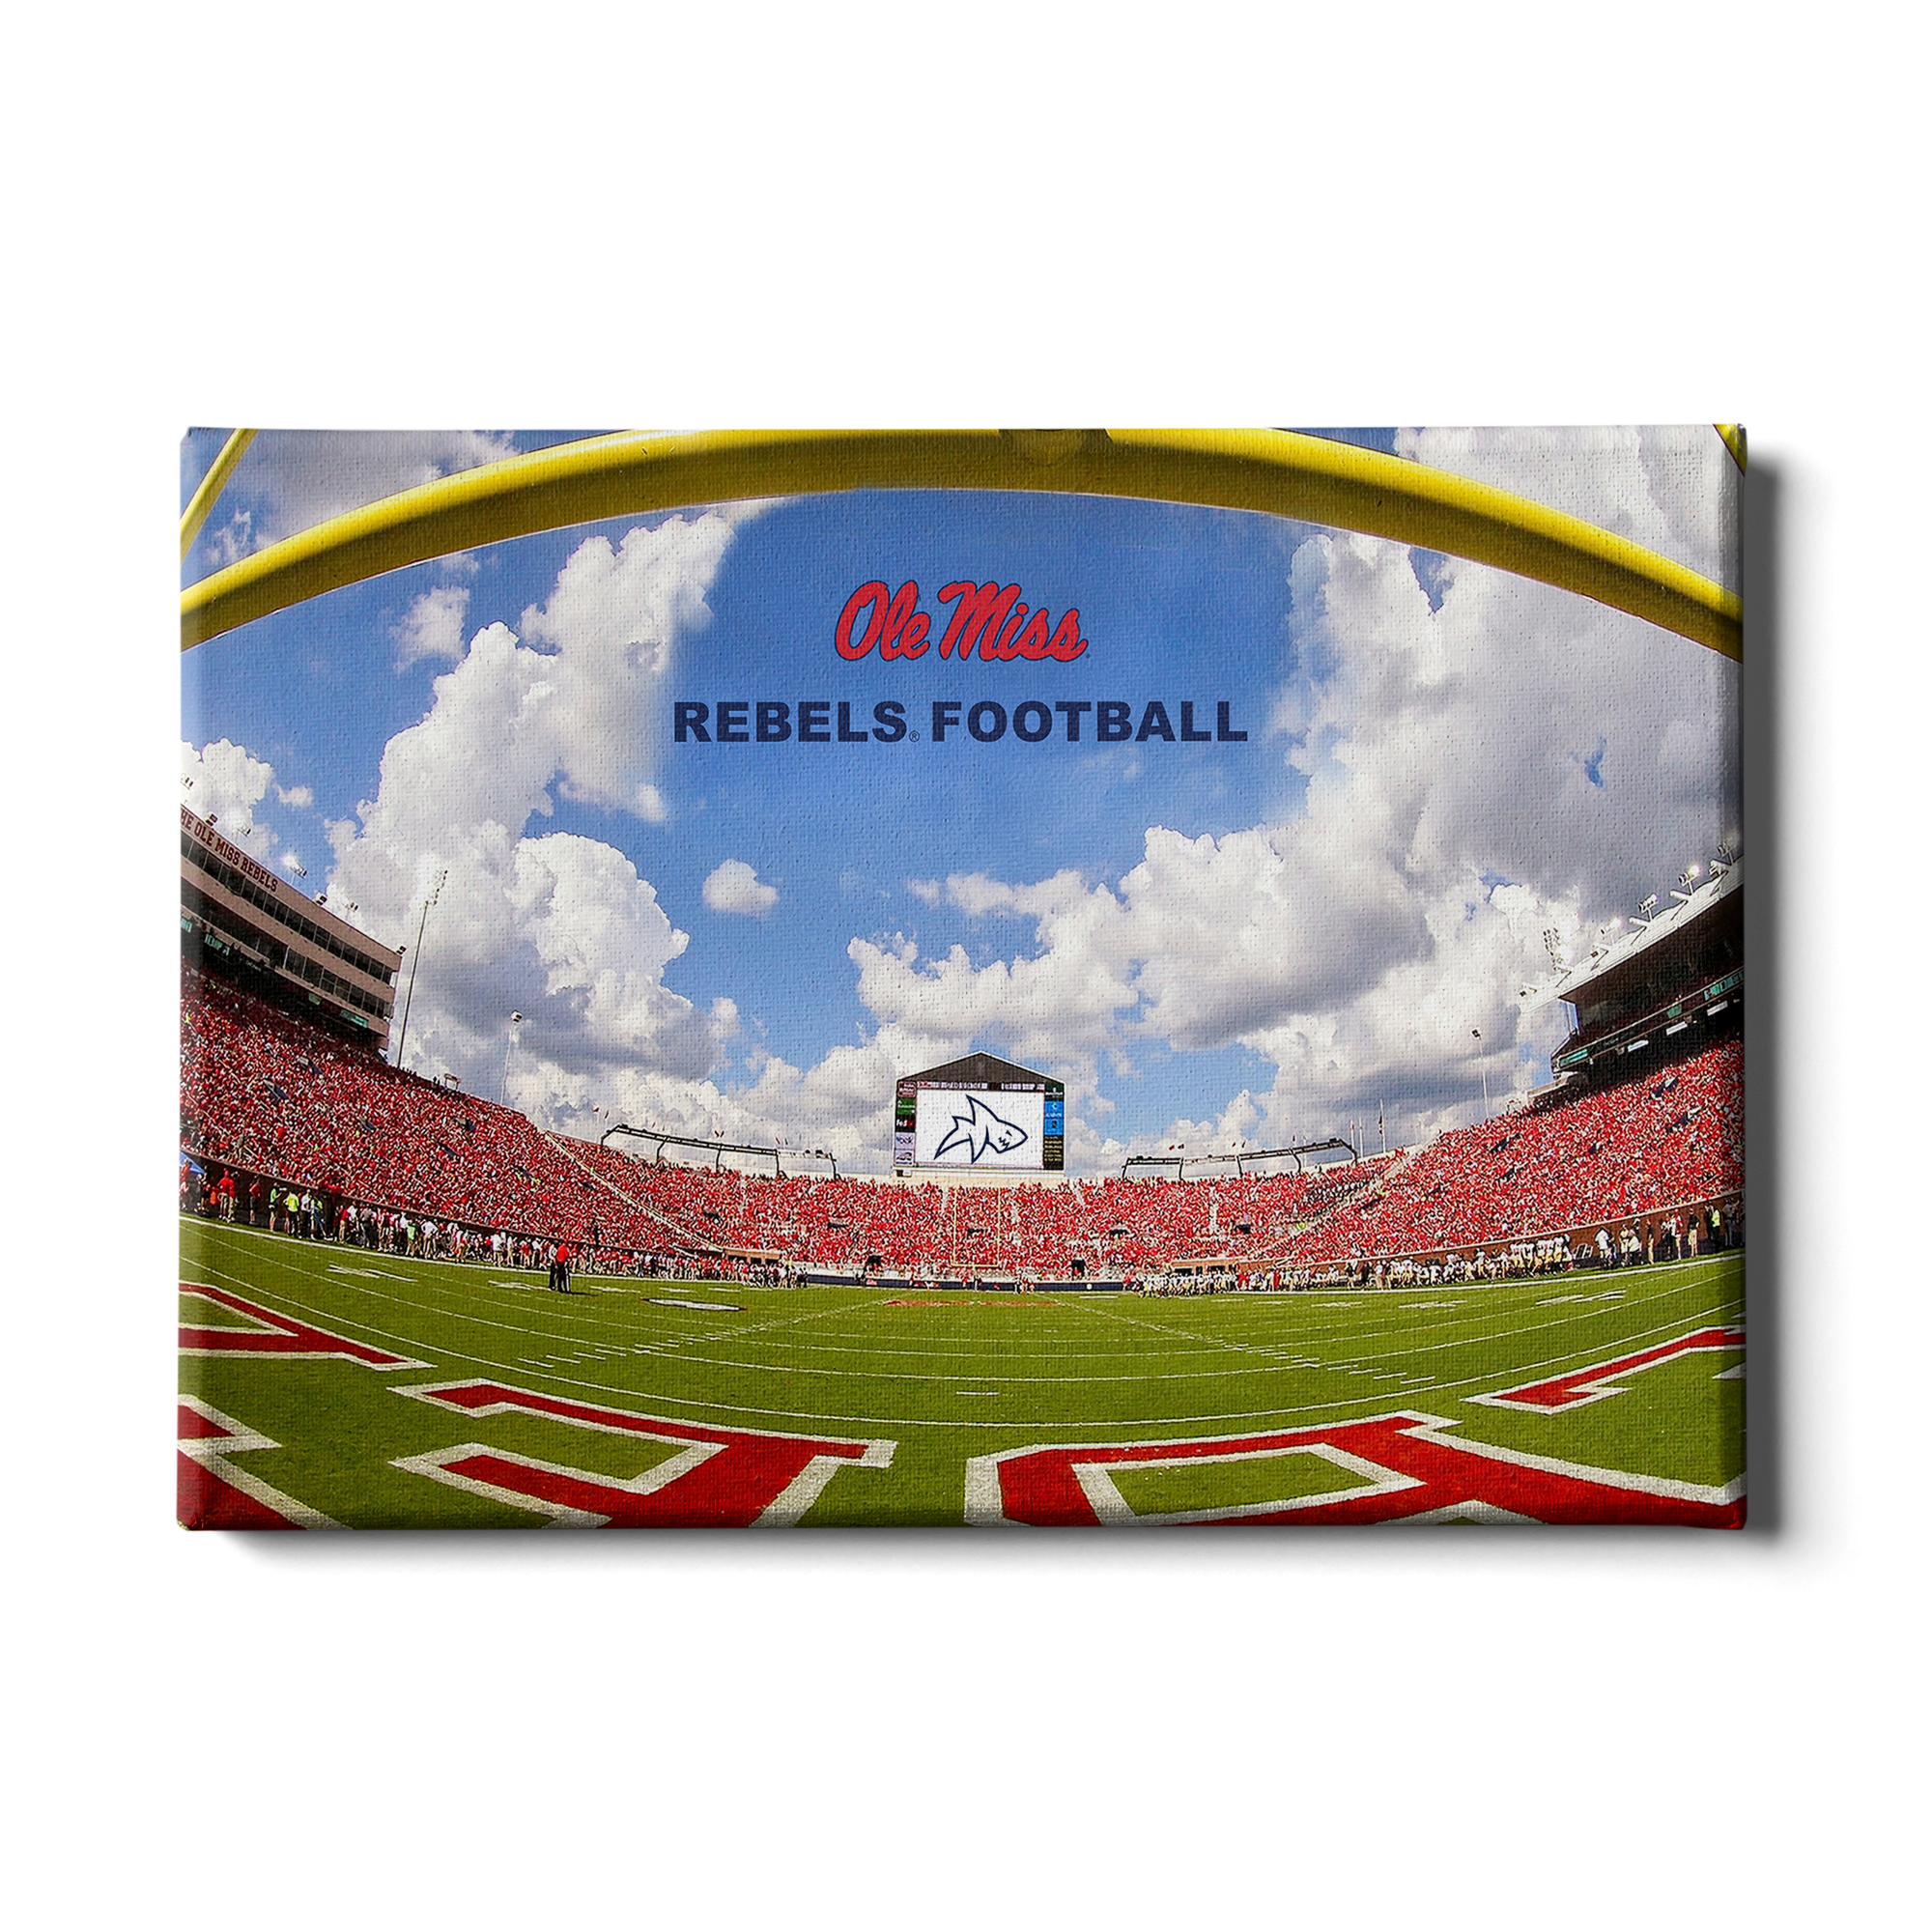 Ole Miss Rebels - End Zone Rebel Football - College Wall Art #Canvas